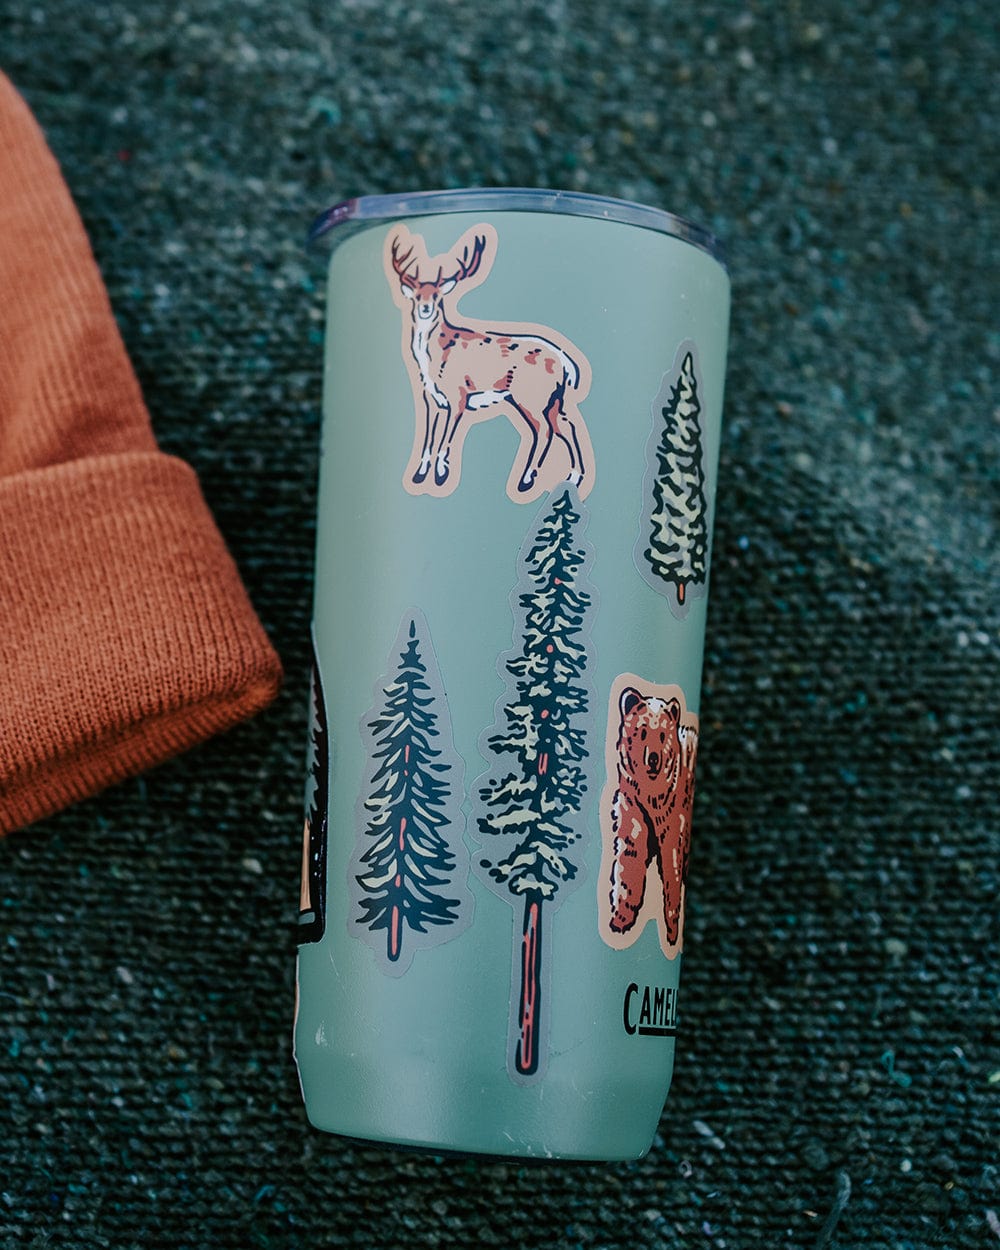 https://cdn.shopify.com/s/files/1/1395/1925/products/keep-nature-wild-nature-study-water-bottle-sticker-pack-33300033405119.jpg?v=1687369031&width=1000